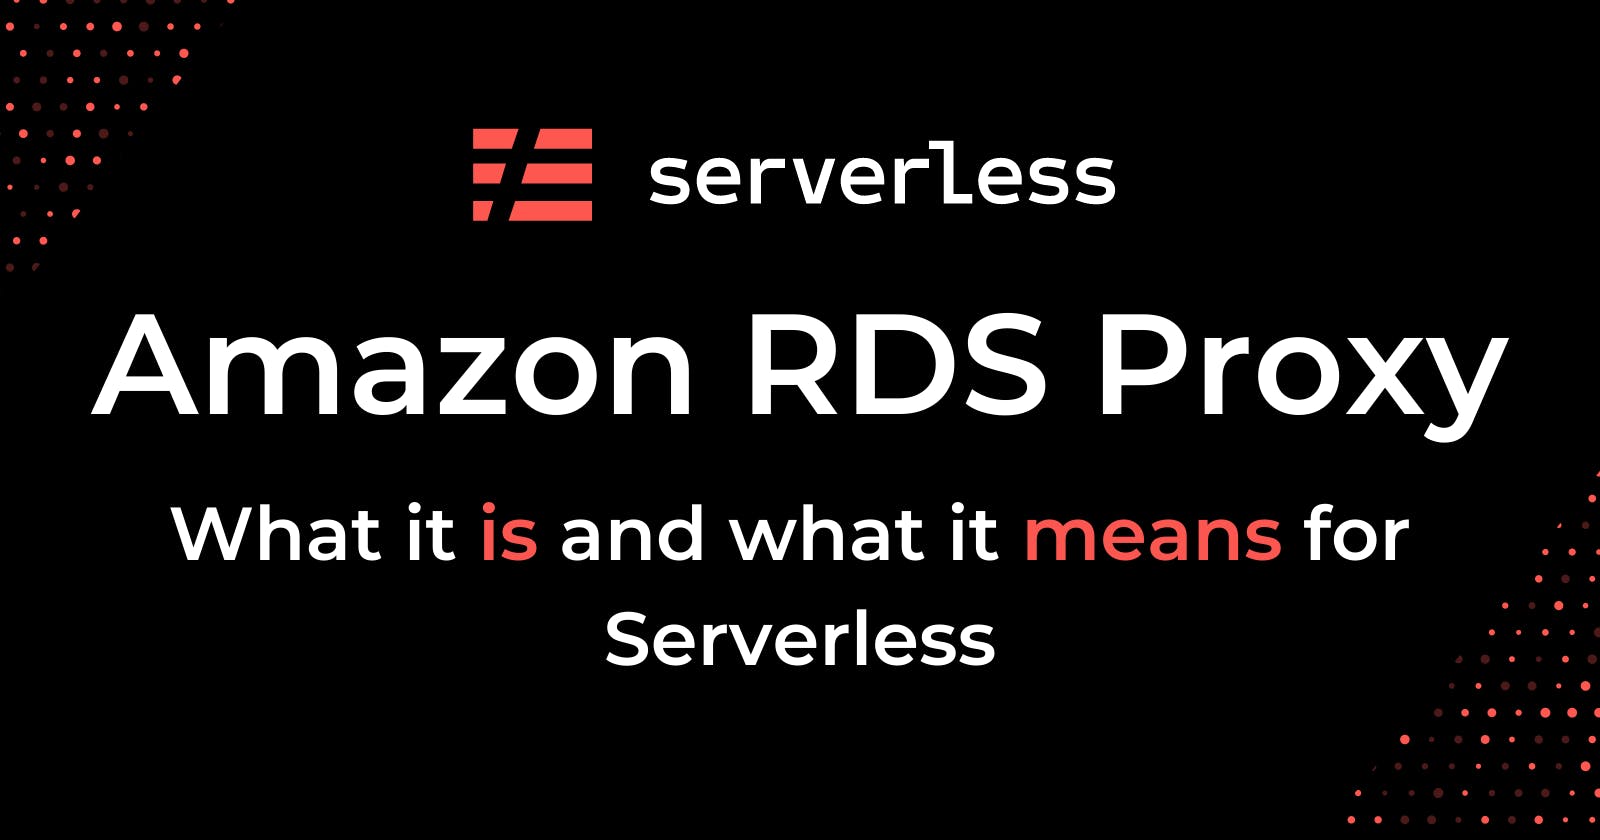 Amazon RDS Proxy makes it easier to use SQL in Serverless